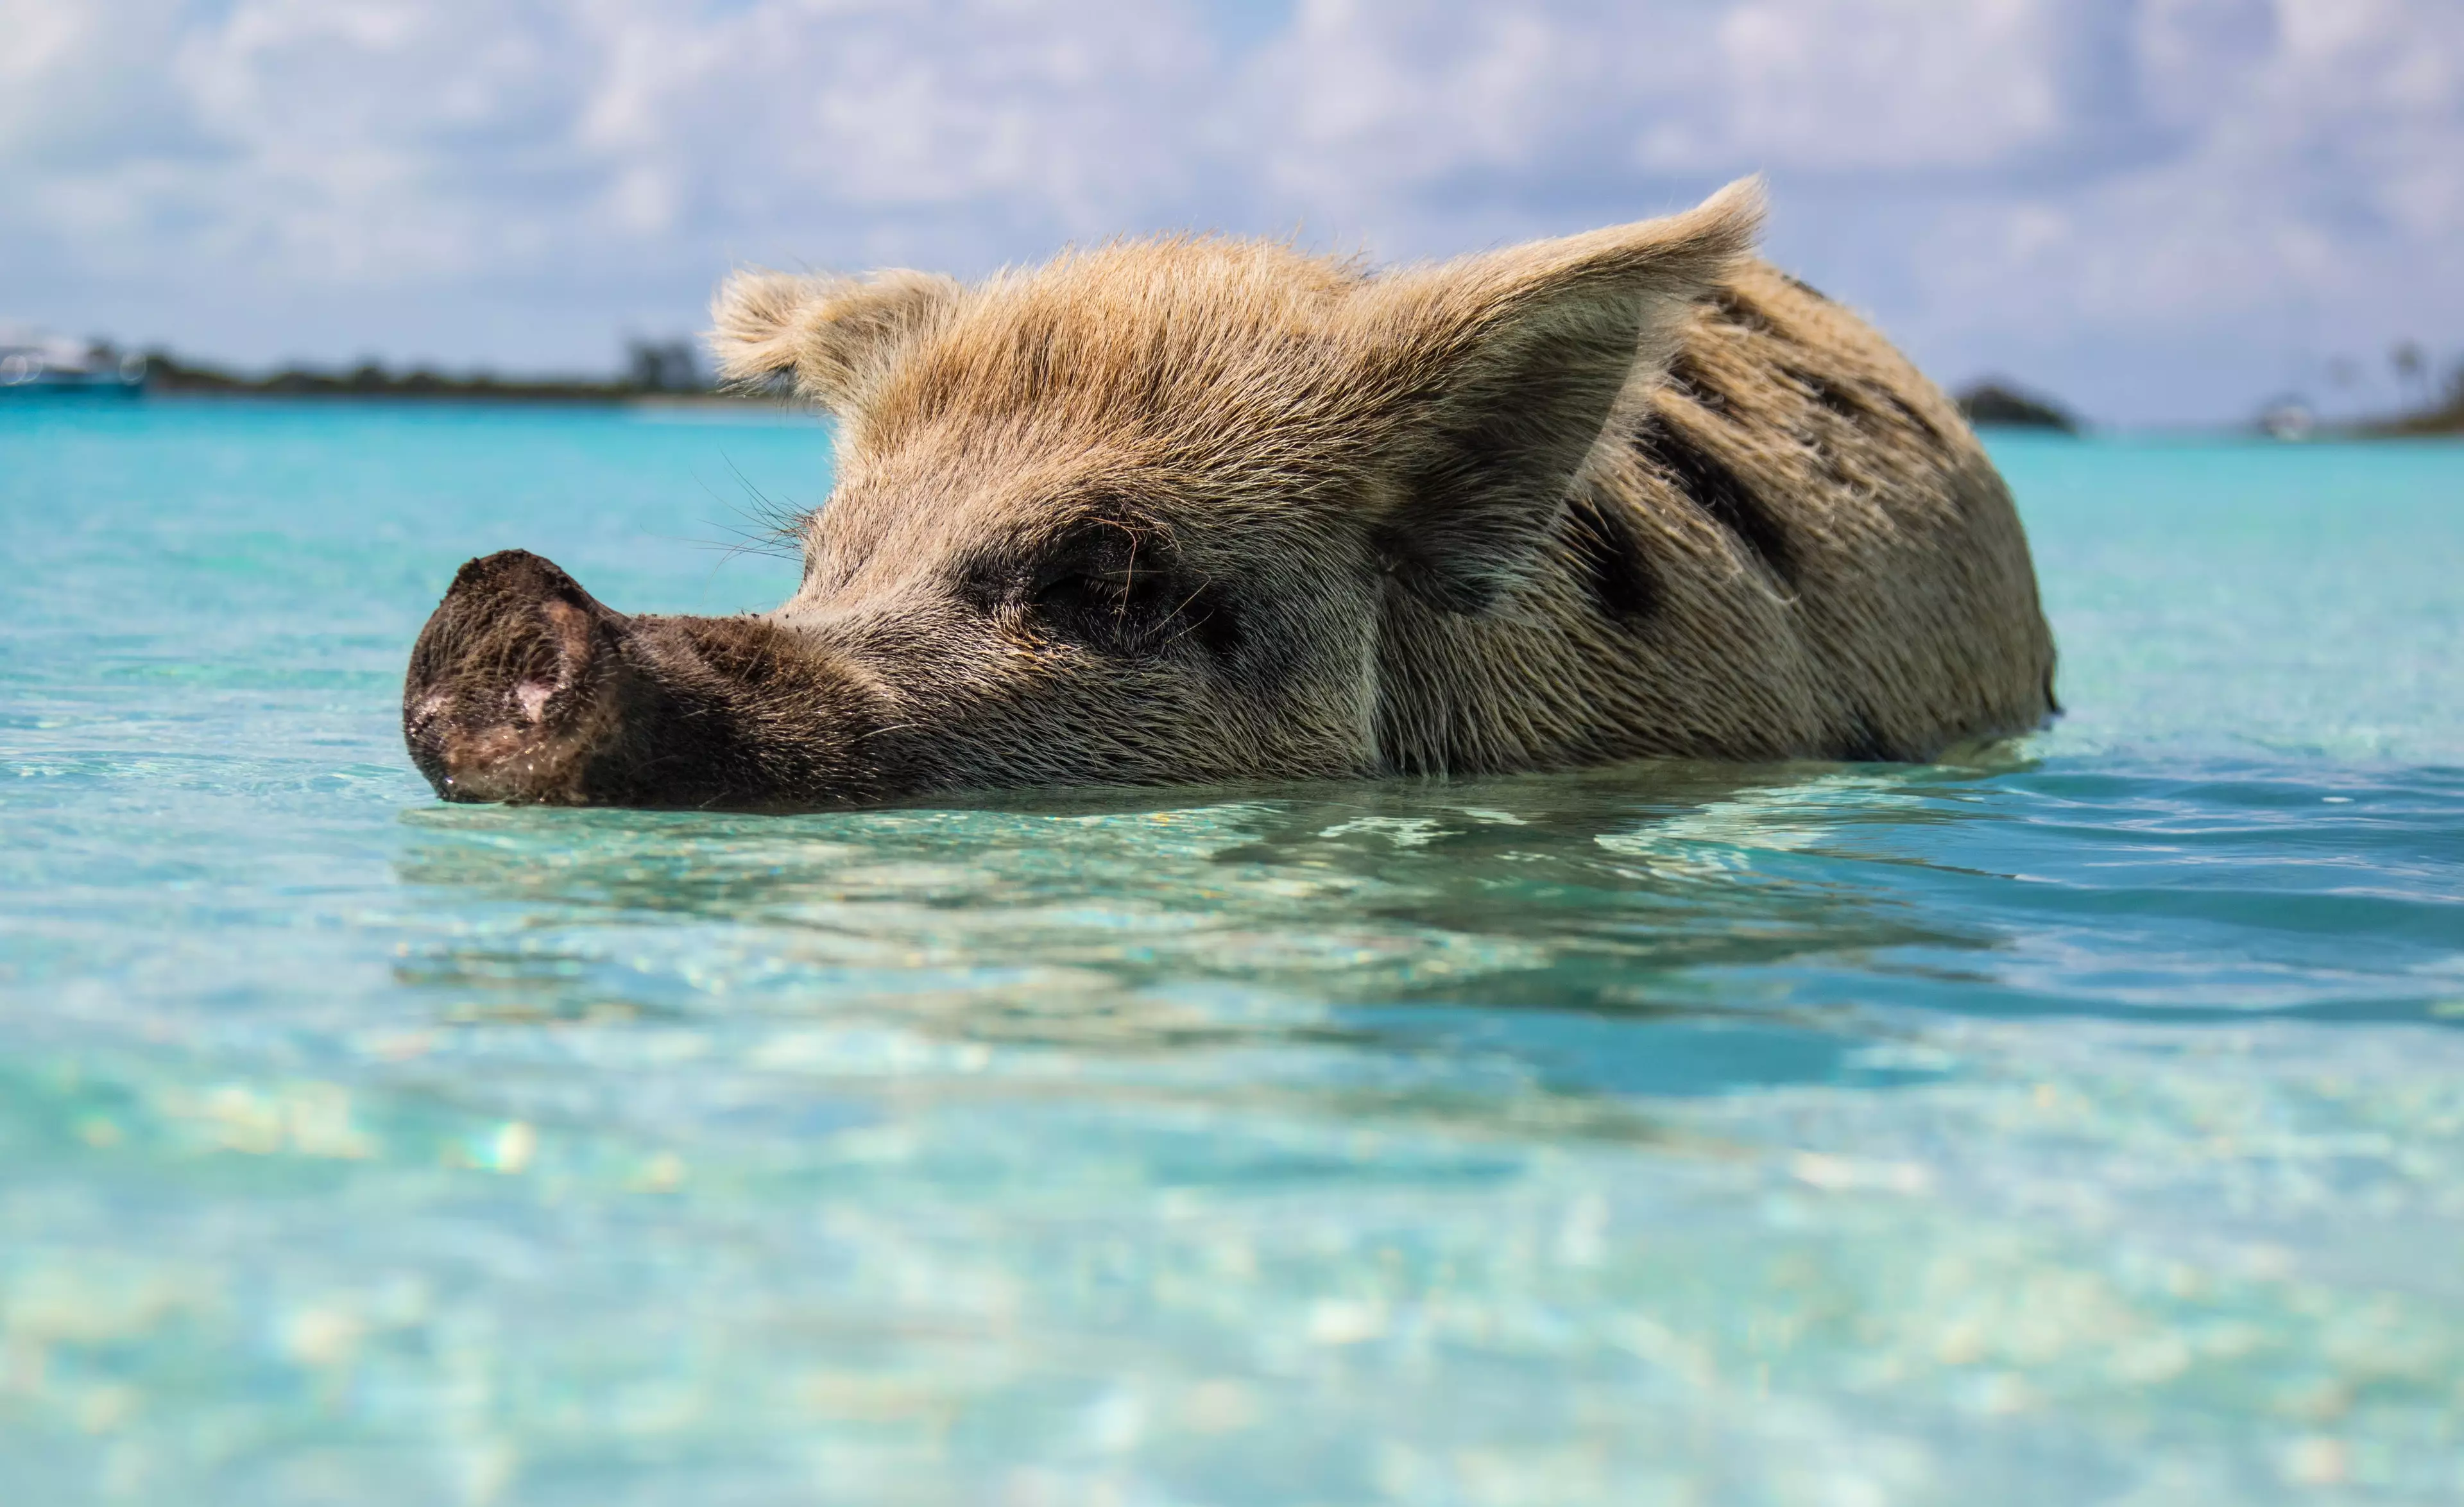 Some waters in the Bahamas are home to wild pigs.